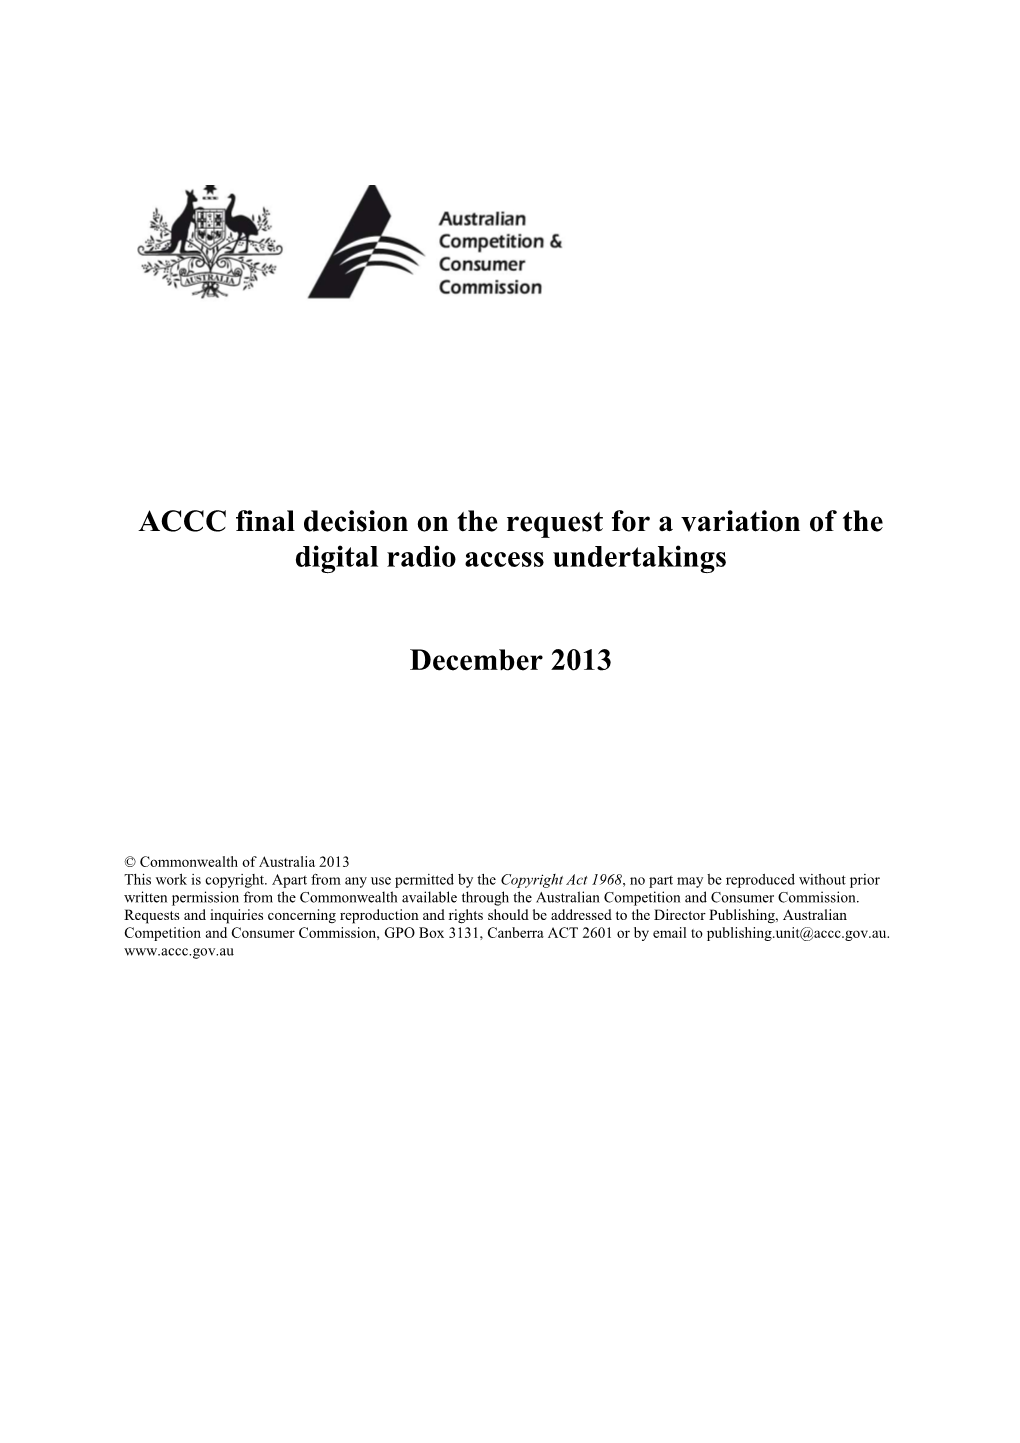 ACCC Final Decision on the Request for a Variation of the Digital Radio Access Undertakings